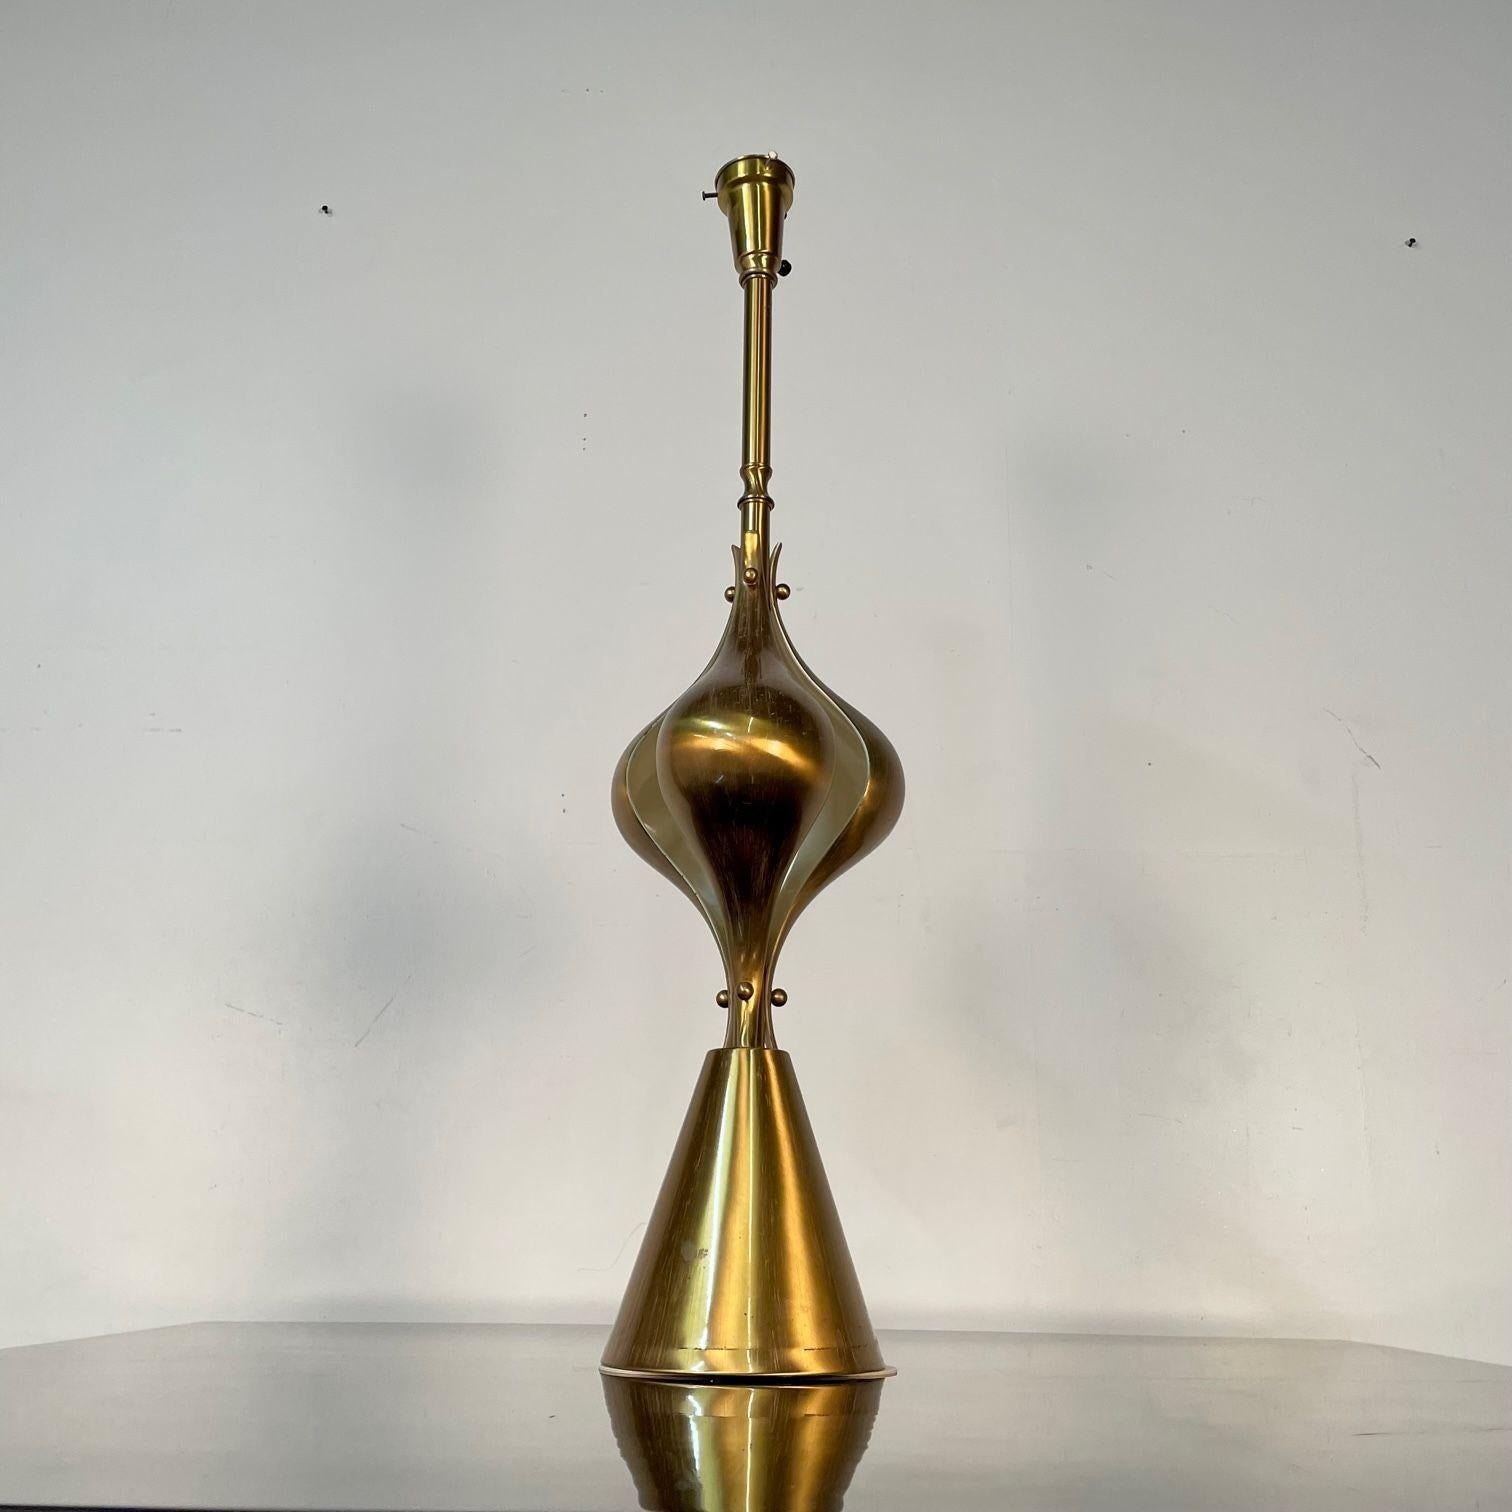 Single Hollywood Regency Style Brass Table / Desk Lamp In Good Condition For Sale In Stamford, CT